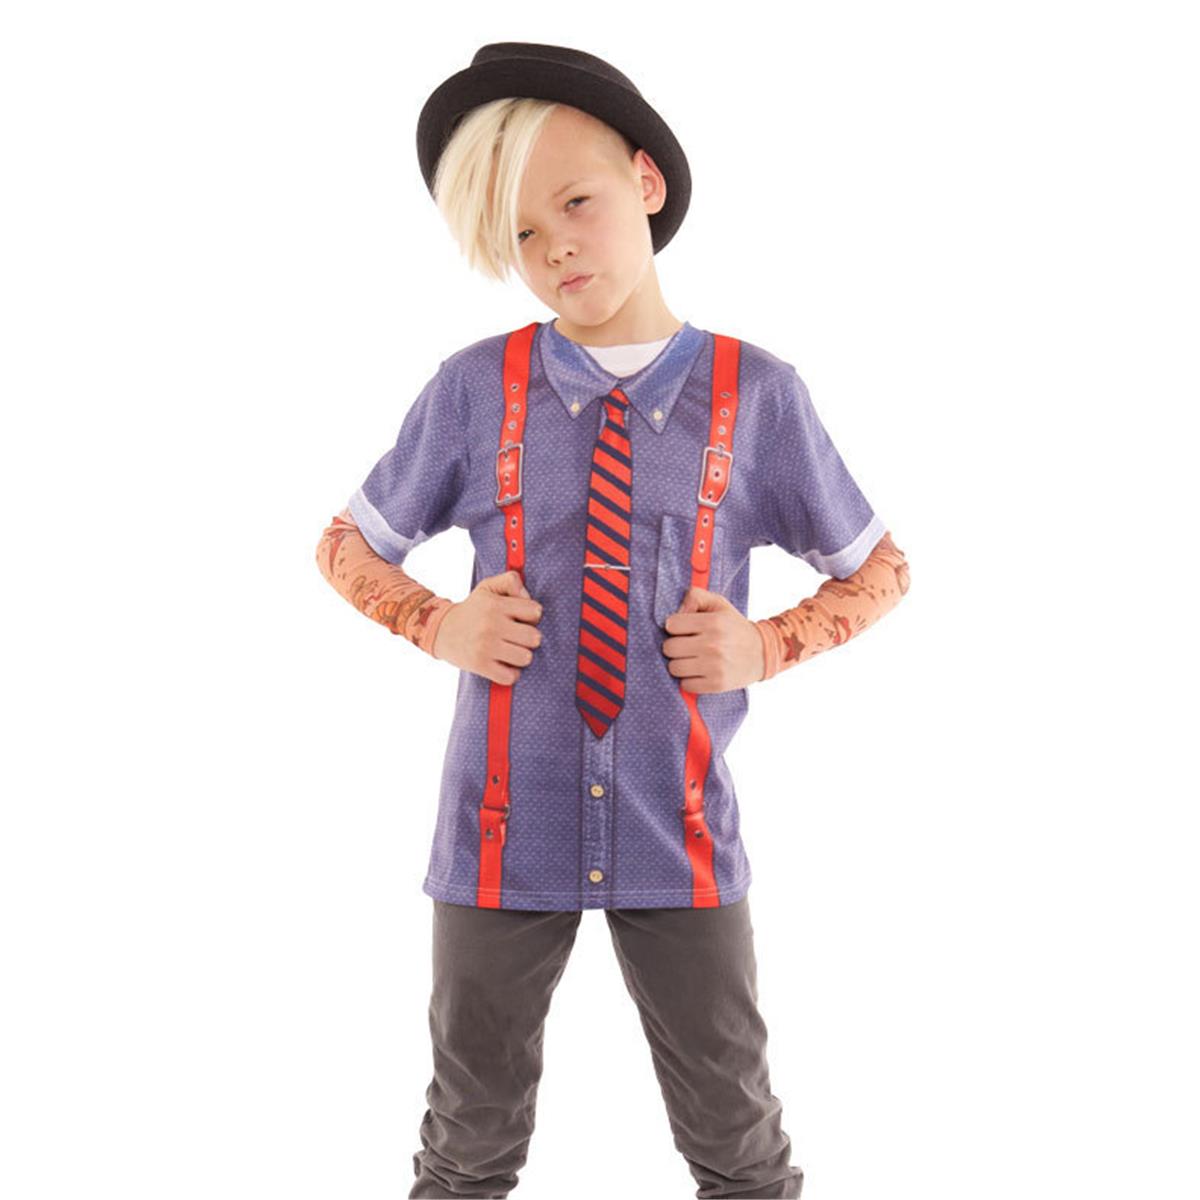 F134198-m Youth Hipster With Suspender Tattoo, Blue - Medium